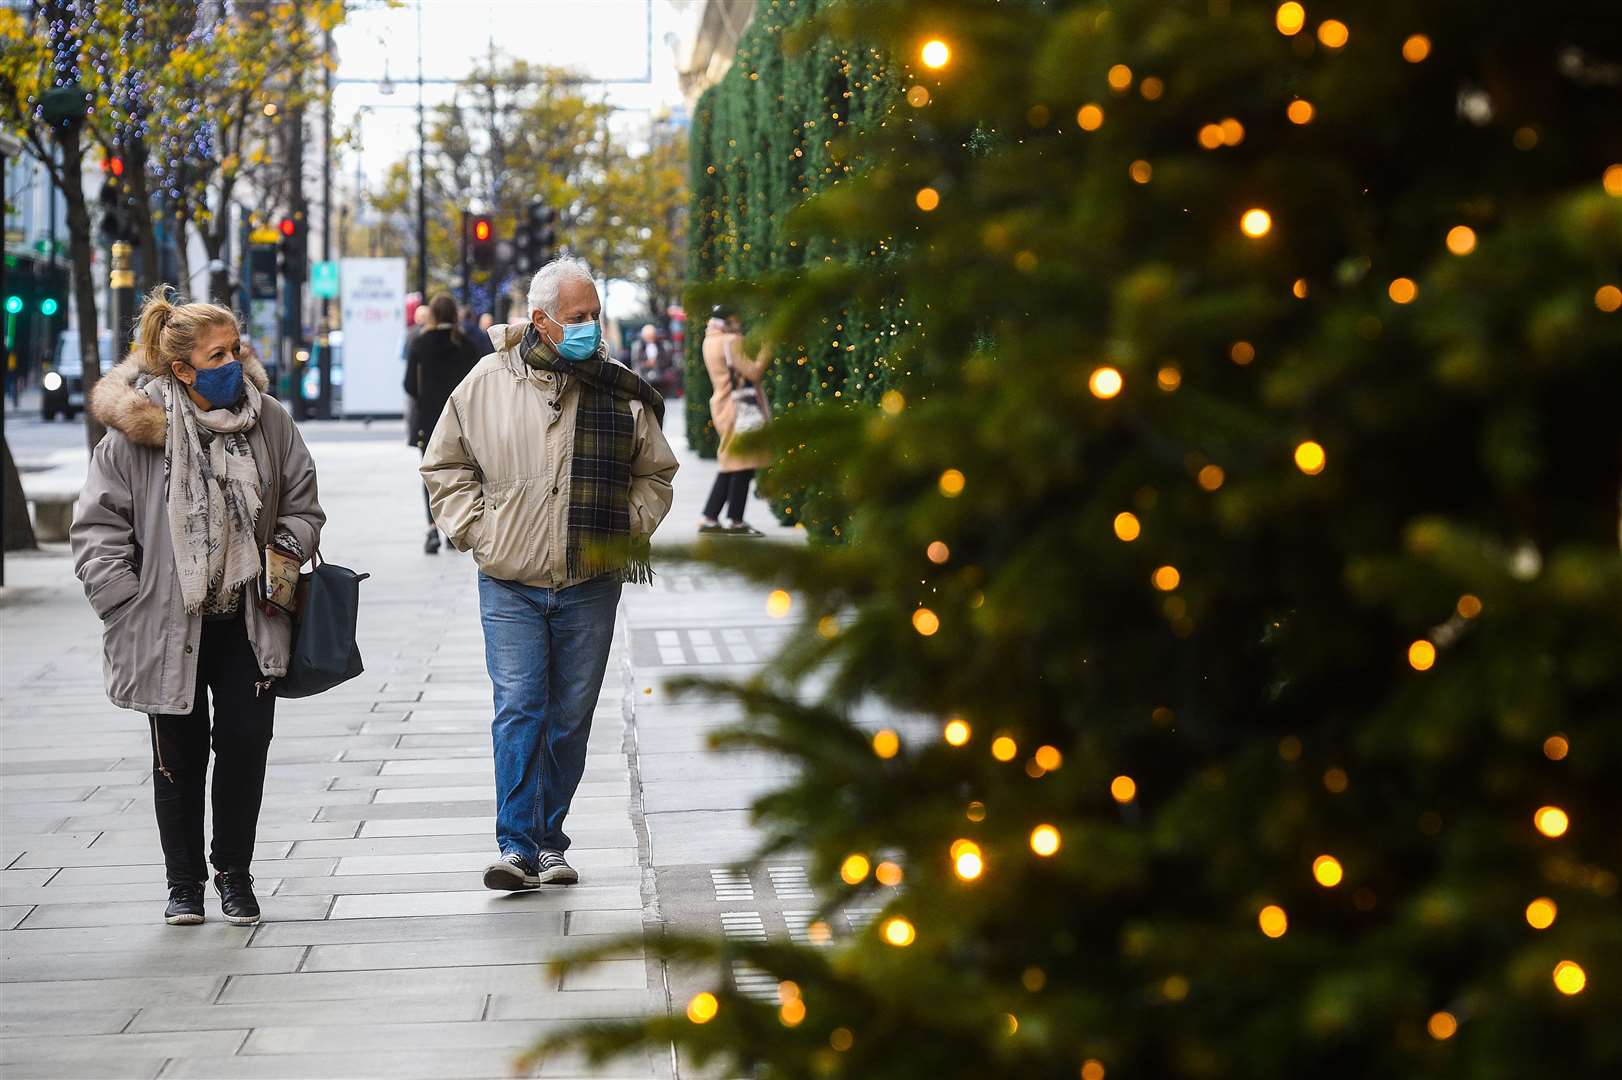 People are planning to send more Christmas cards this year as a result of coronavirus restrictions, according to a YouGov survey commissioned by Royal Mail (Kirsty O’Connor/PA)